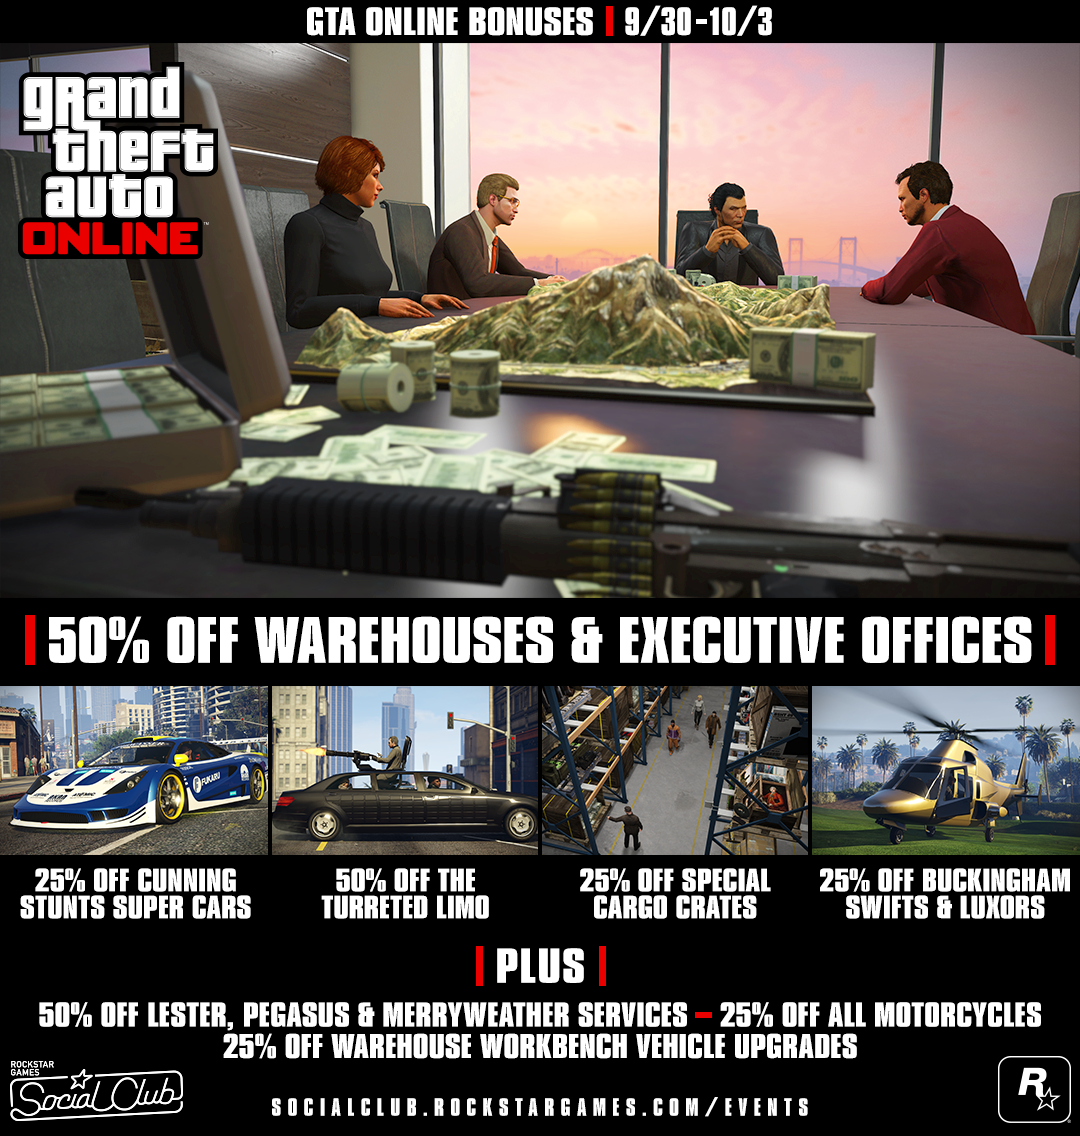 This Weekend S Gta Online Bonuses Half Off Warehouses Executive Offices Unlockable Yellow Swirl Pajamas Smoking Jacket Discounts And More Sept 30th Oct 3rd Rockstar Games